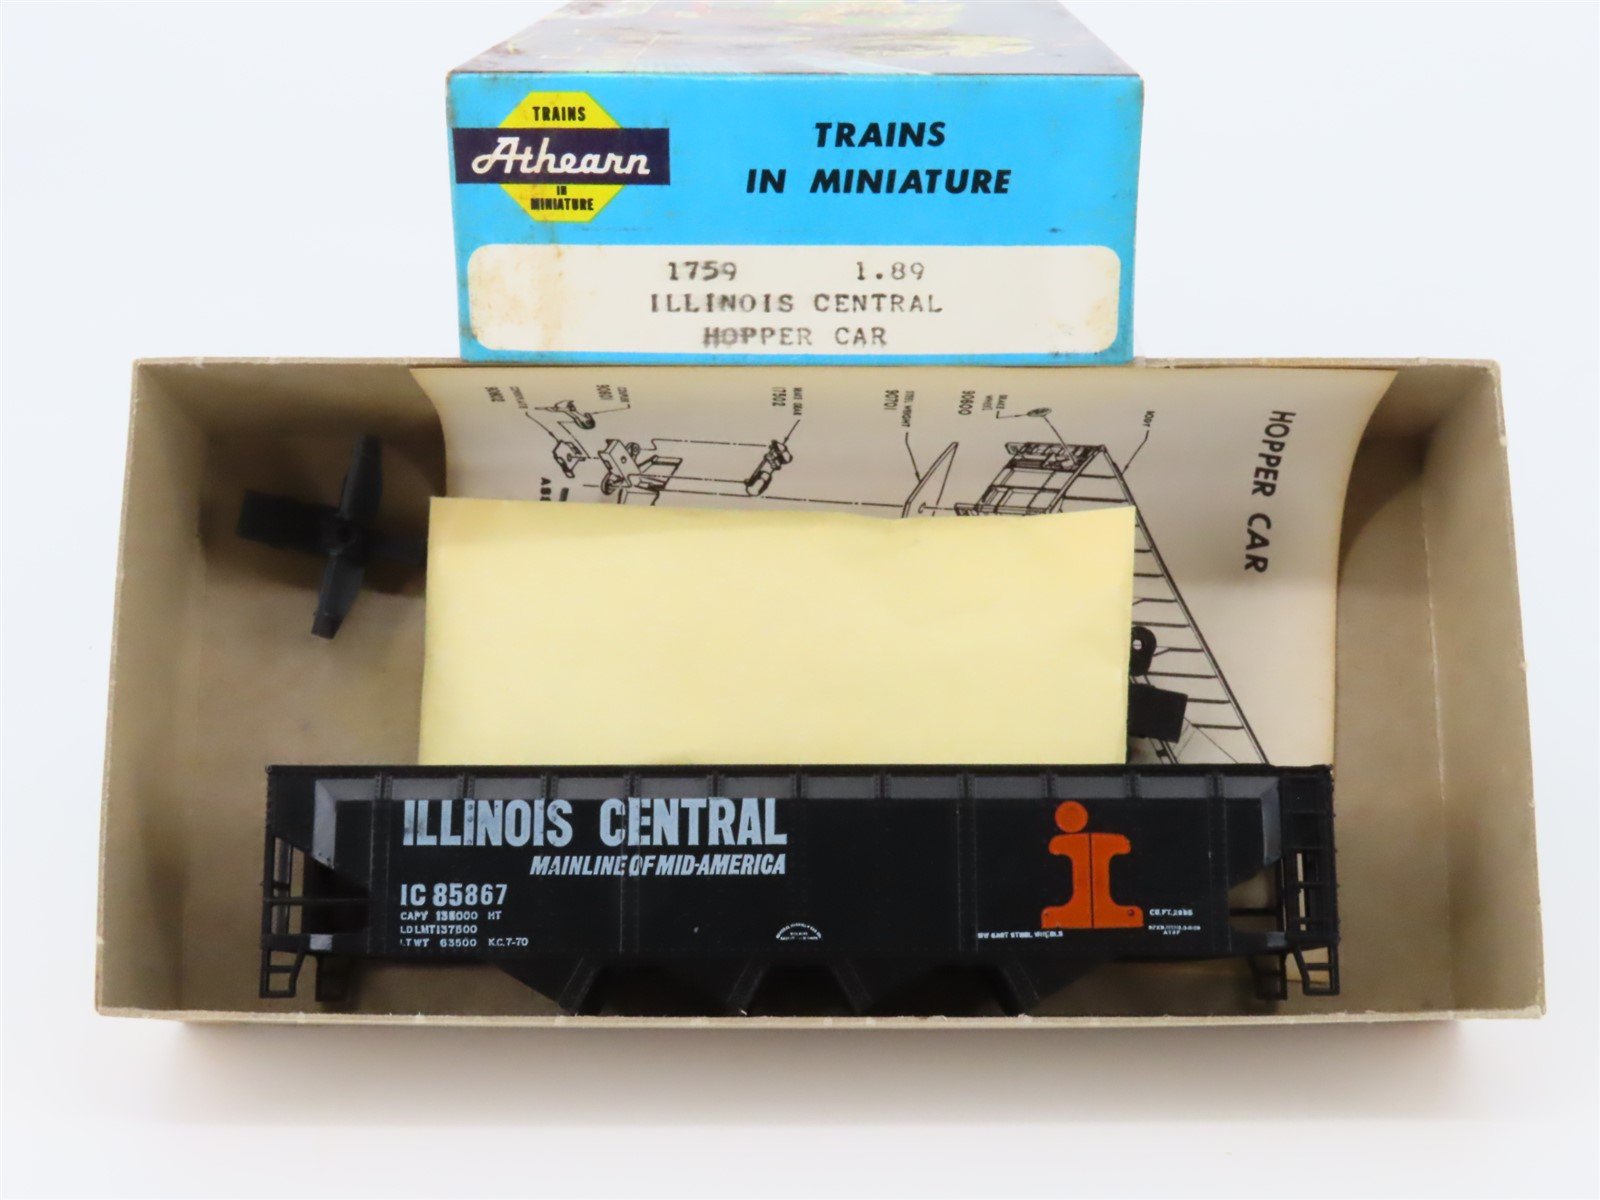 HO Scale Athearn 1759 IC Illinois Central 4-Bay Open Hopper #85867 Kit